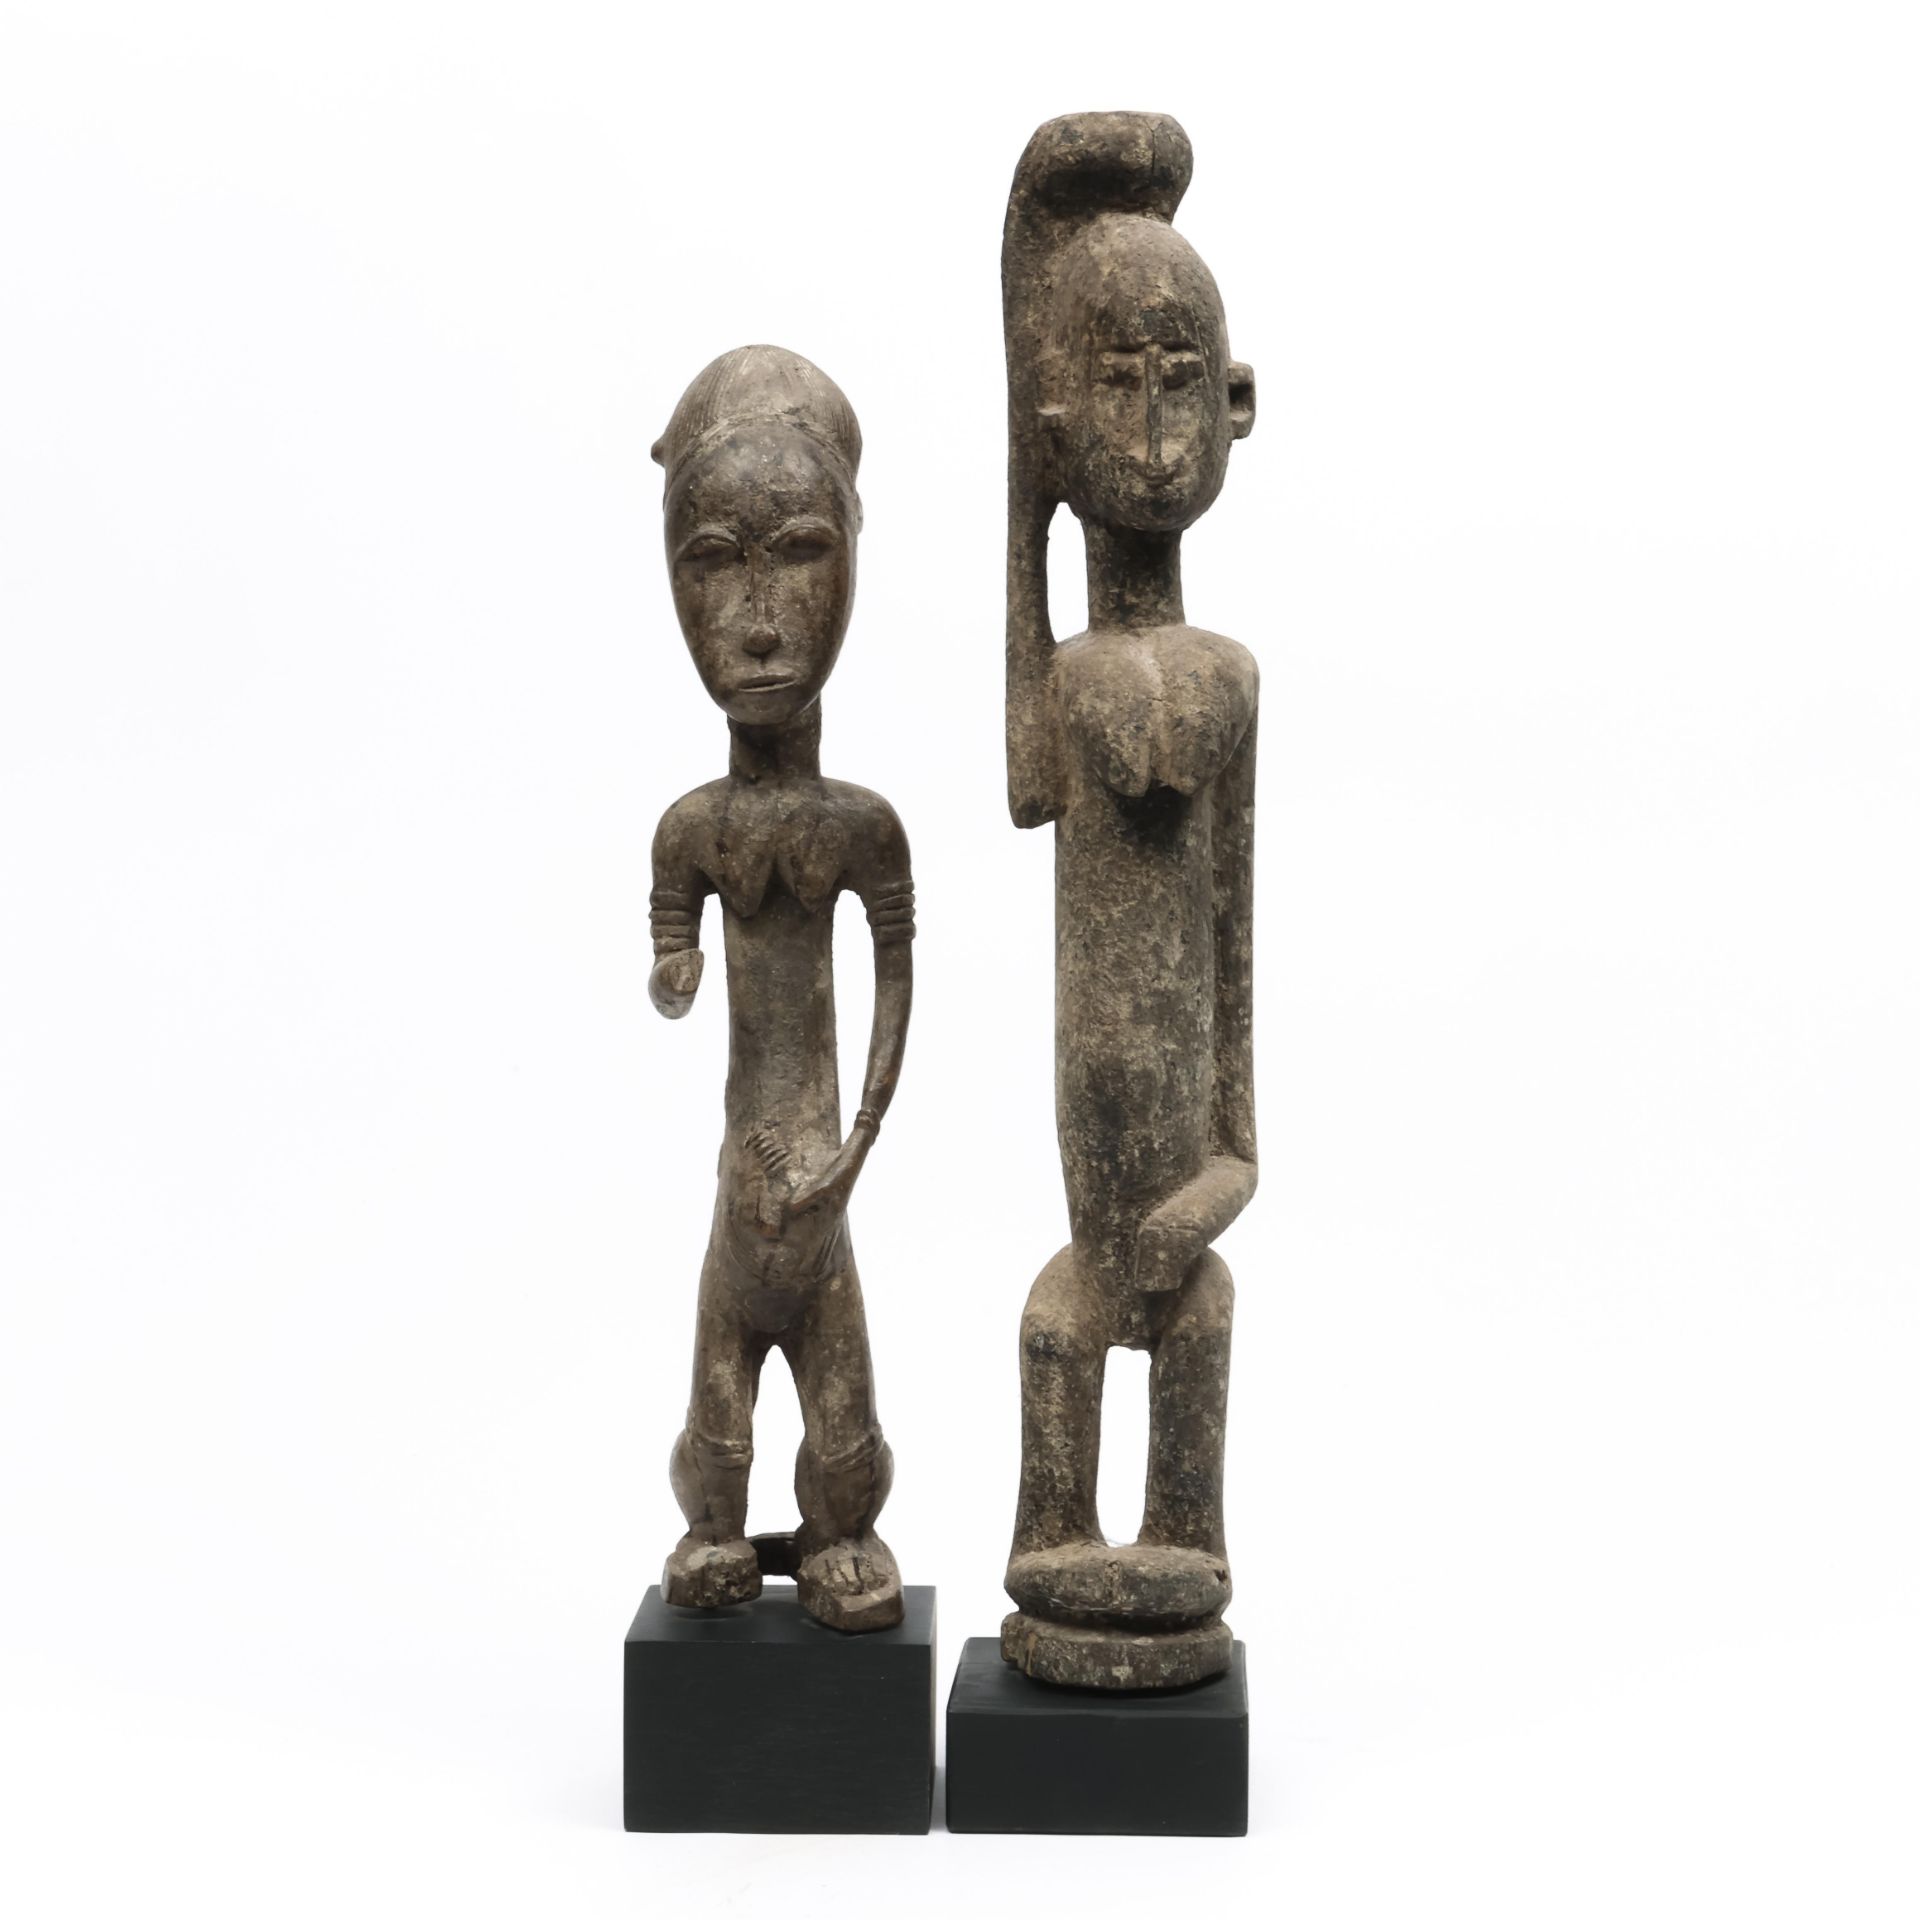 An African standing female figure with one arm missing and a wooden figure with one raised arm. - Image 2 of 2